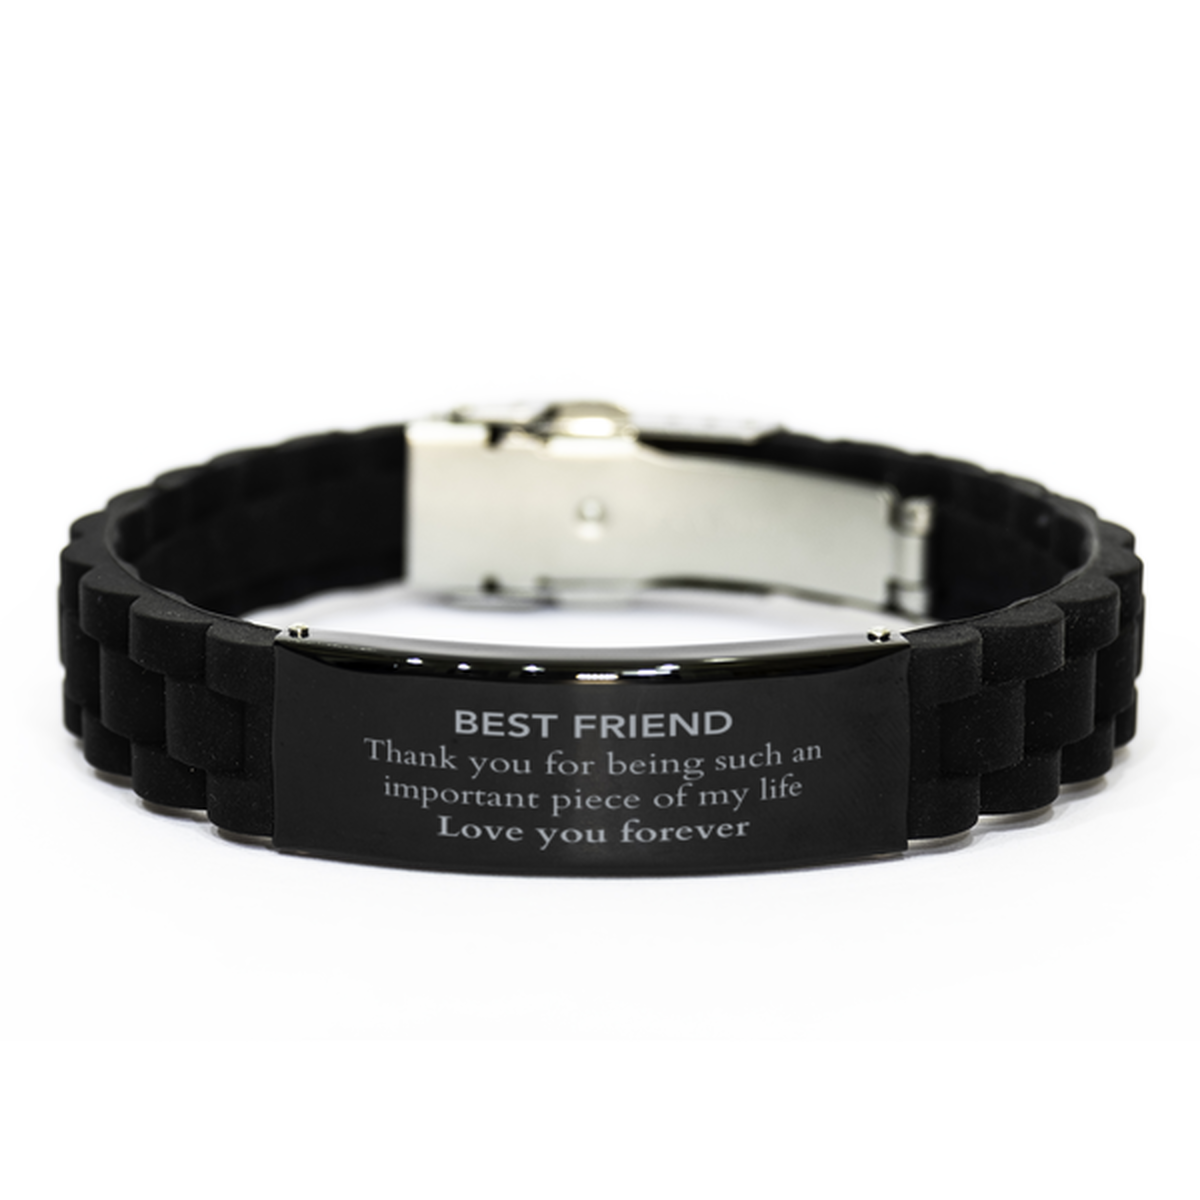 Appropriate Best Friend Black Glidelock Clasp Bracelet Epic Birthday Gifts for Best Friend Thank you for being such an important piece of my life Best Friend Christmas Mothers Fathers Day